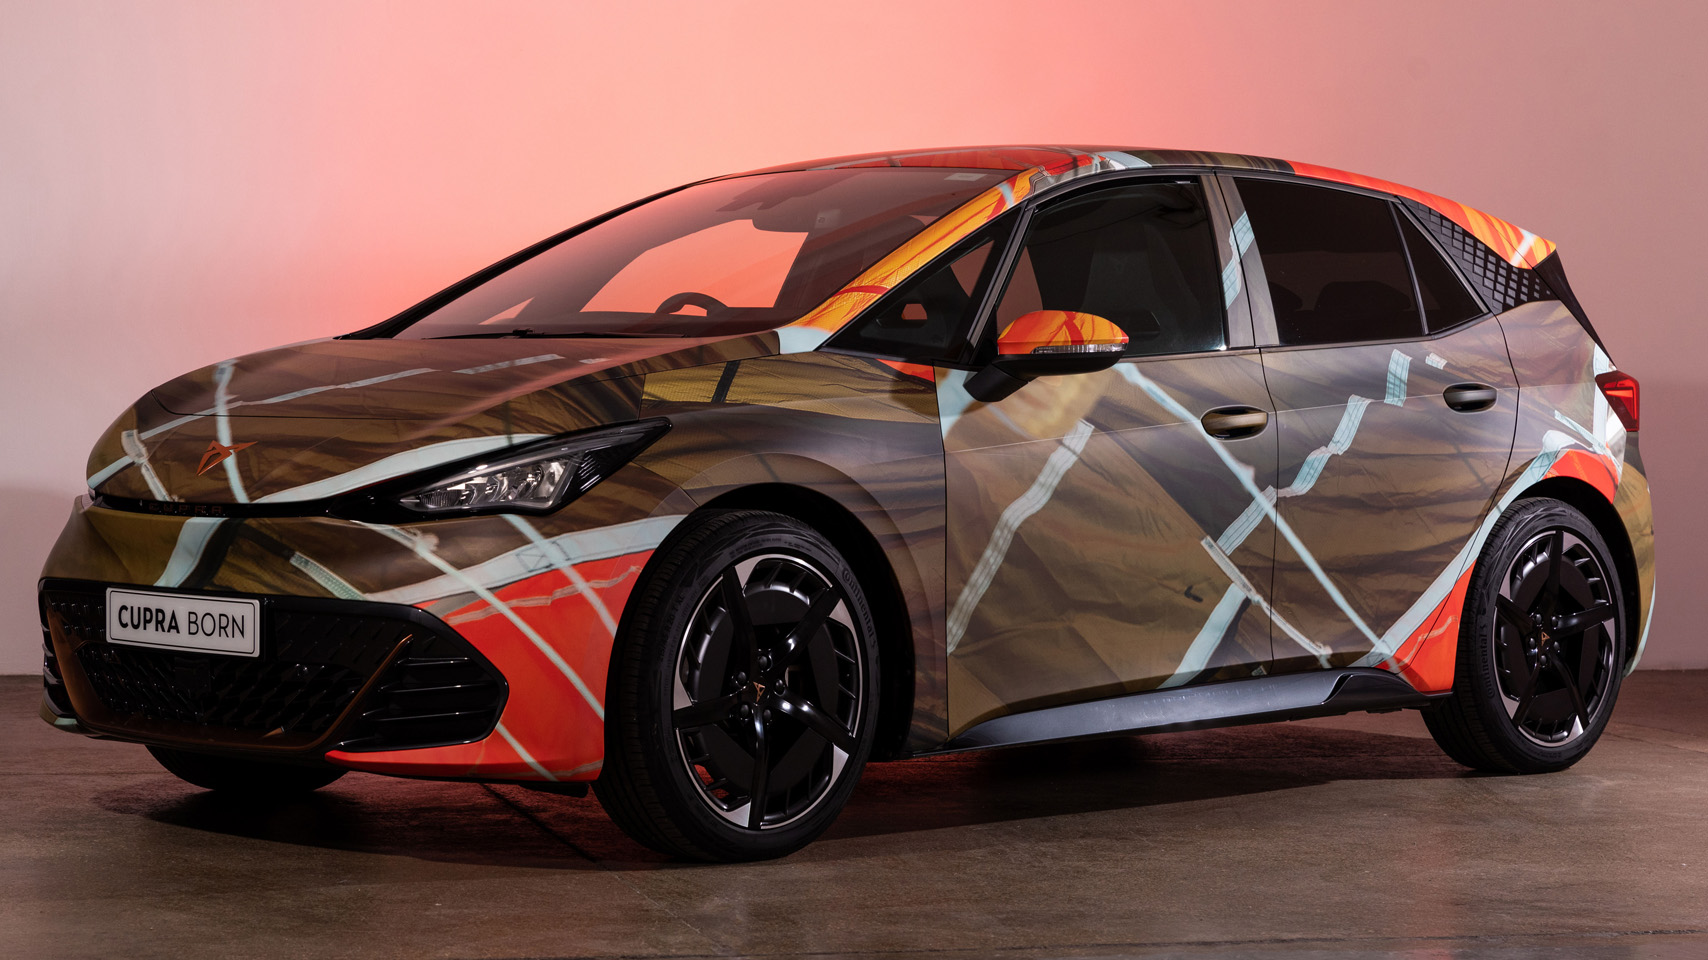 A CUPRA Born with extravagant decal